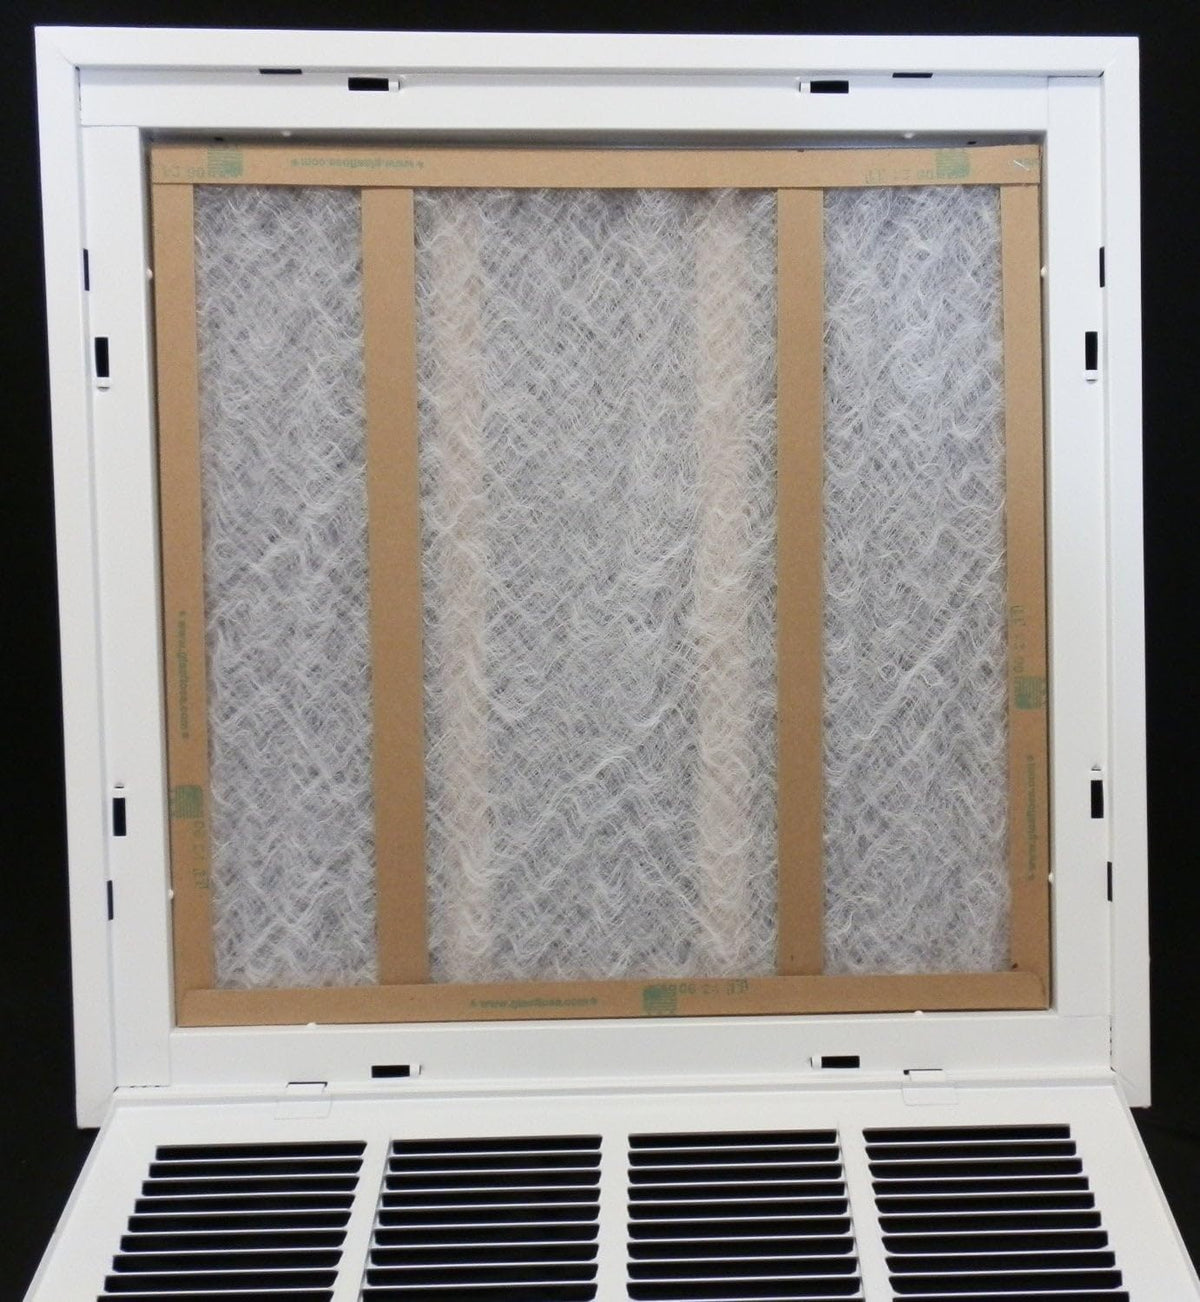 32&quot; X 26&quot; Steel Return Air Filter Grille for 1&quot; Filter - Removable Frame - [Outer Dimensions: 34 5/8&quot; X 28 5/8&quot;]